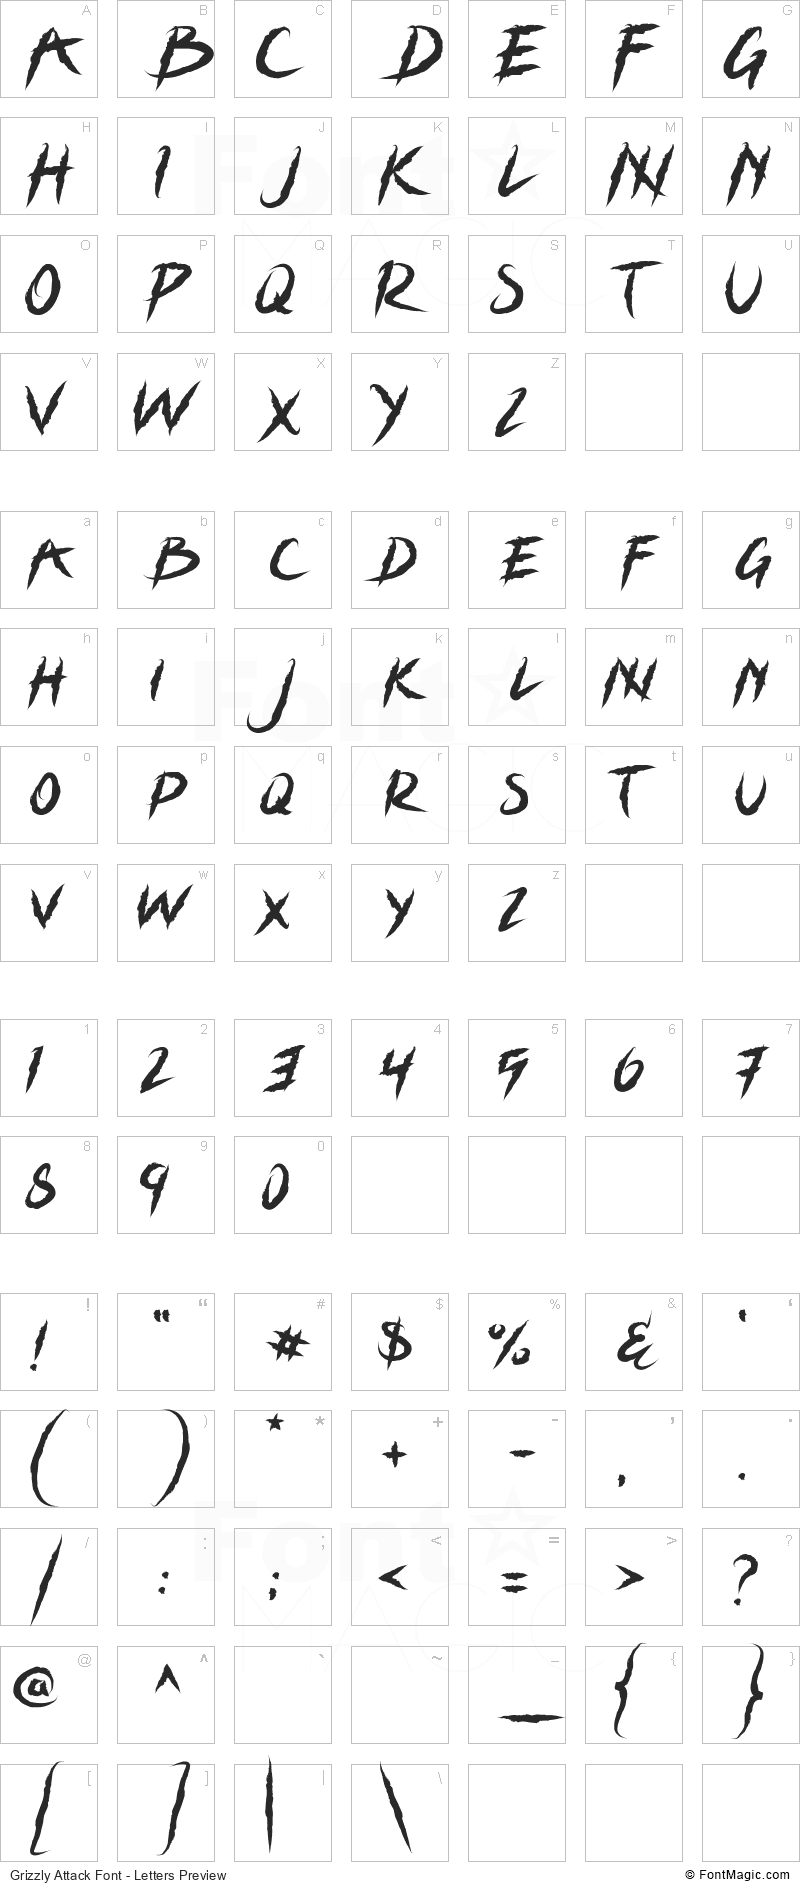 Grizzly Attack Font - All Latters Preview Chart